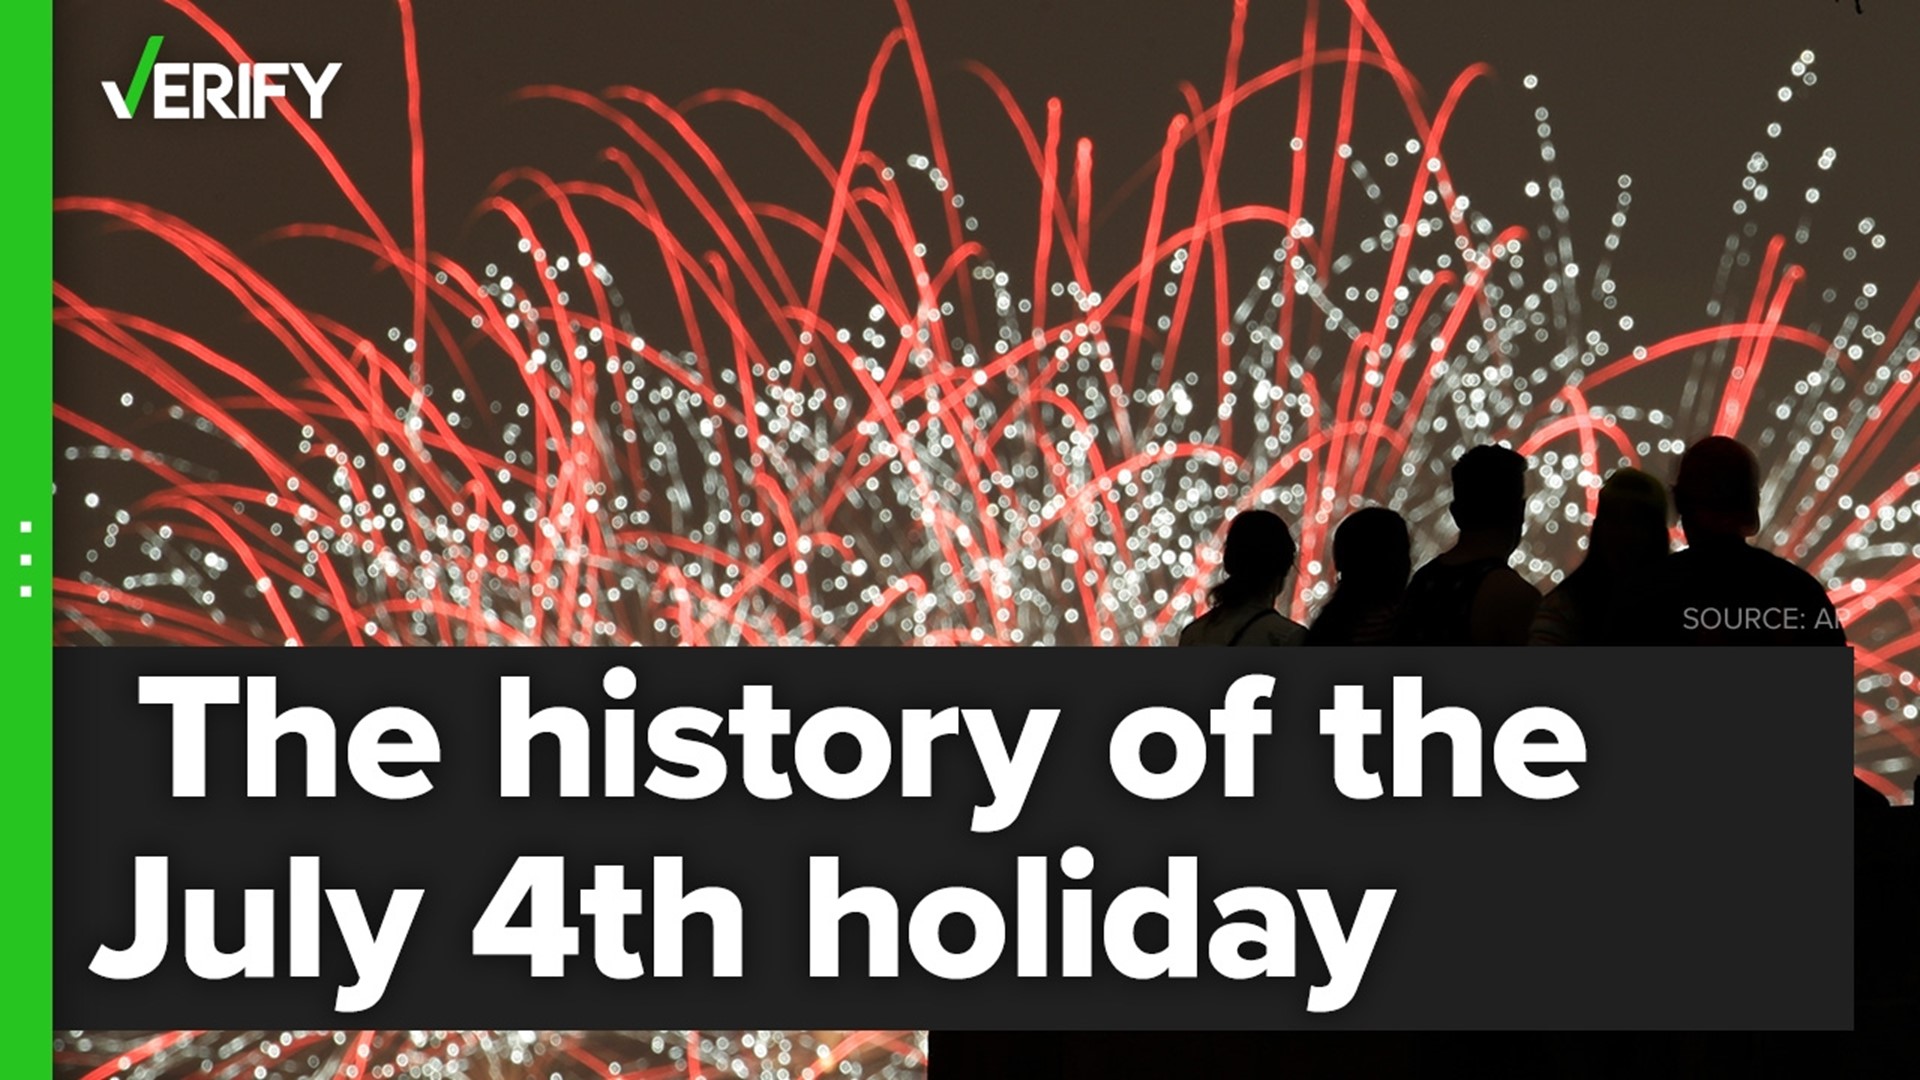 Independence Day celebrations didn’t become commonplace until after the War of 1812, and July 4 didn’t become a federal holiday until 1870.